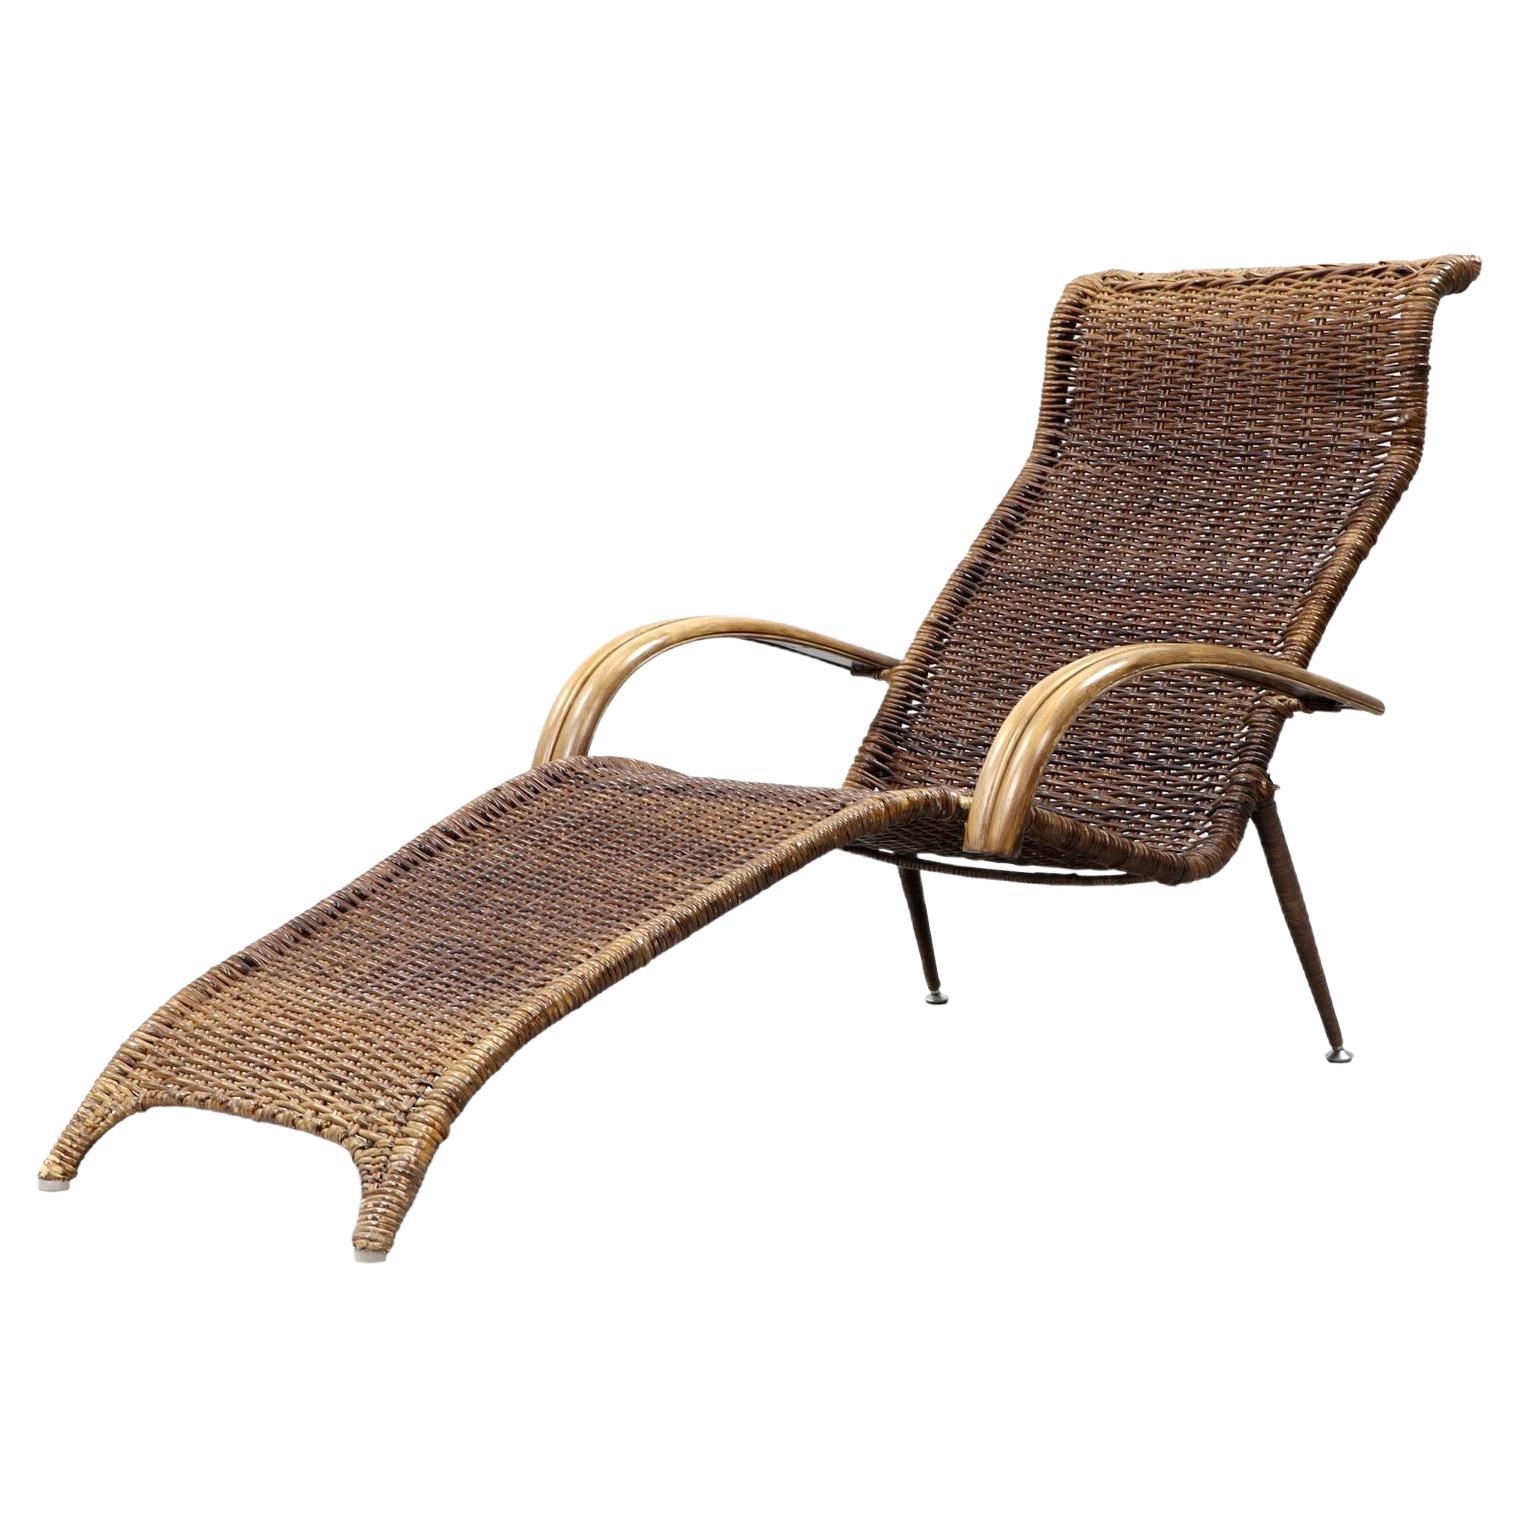 Mid-Century, Sculptural Italian Rattan and Bamboo Chaise Longue Lounge Chair For Sale